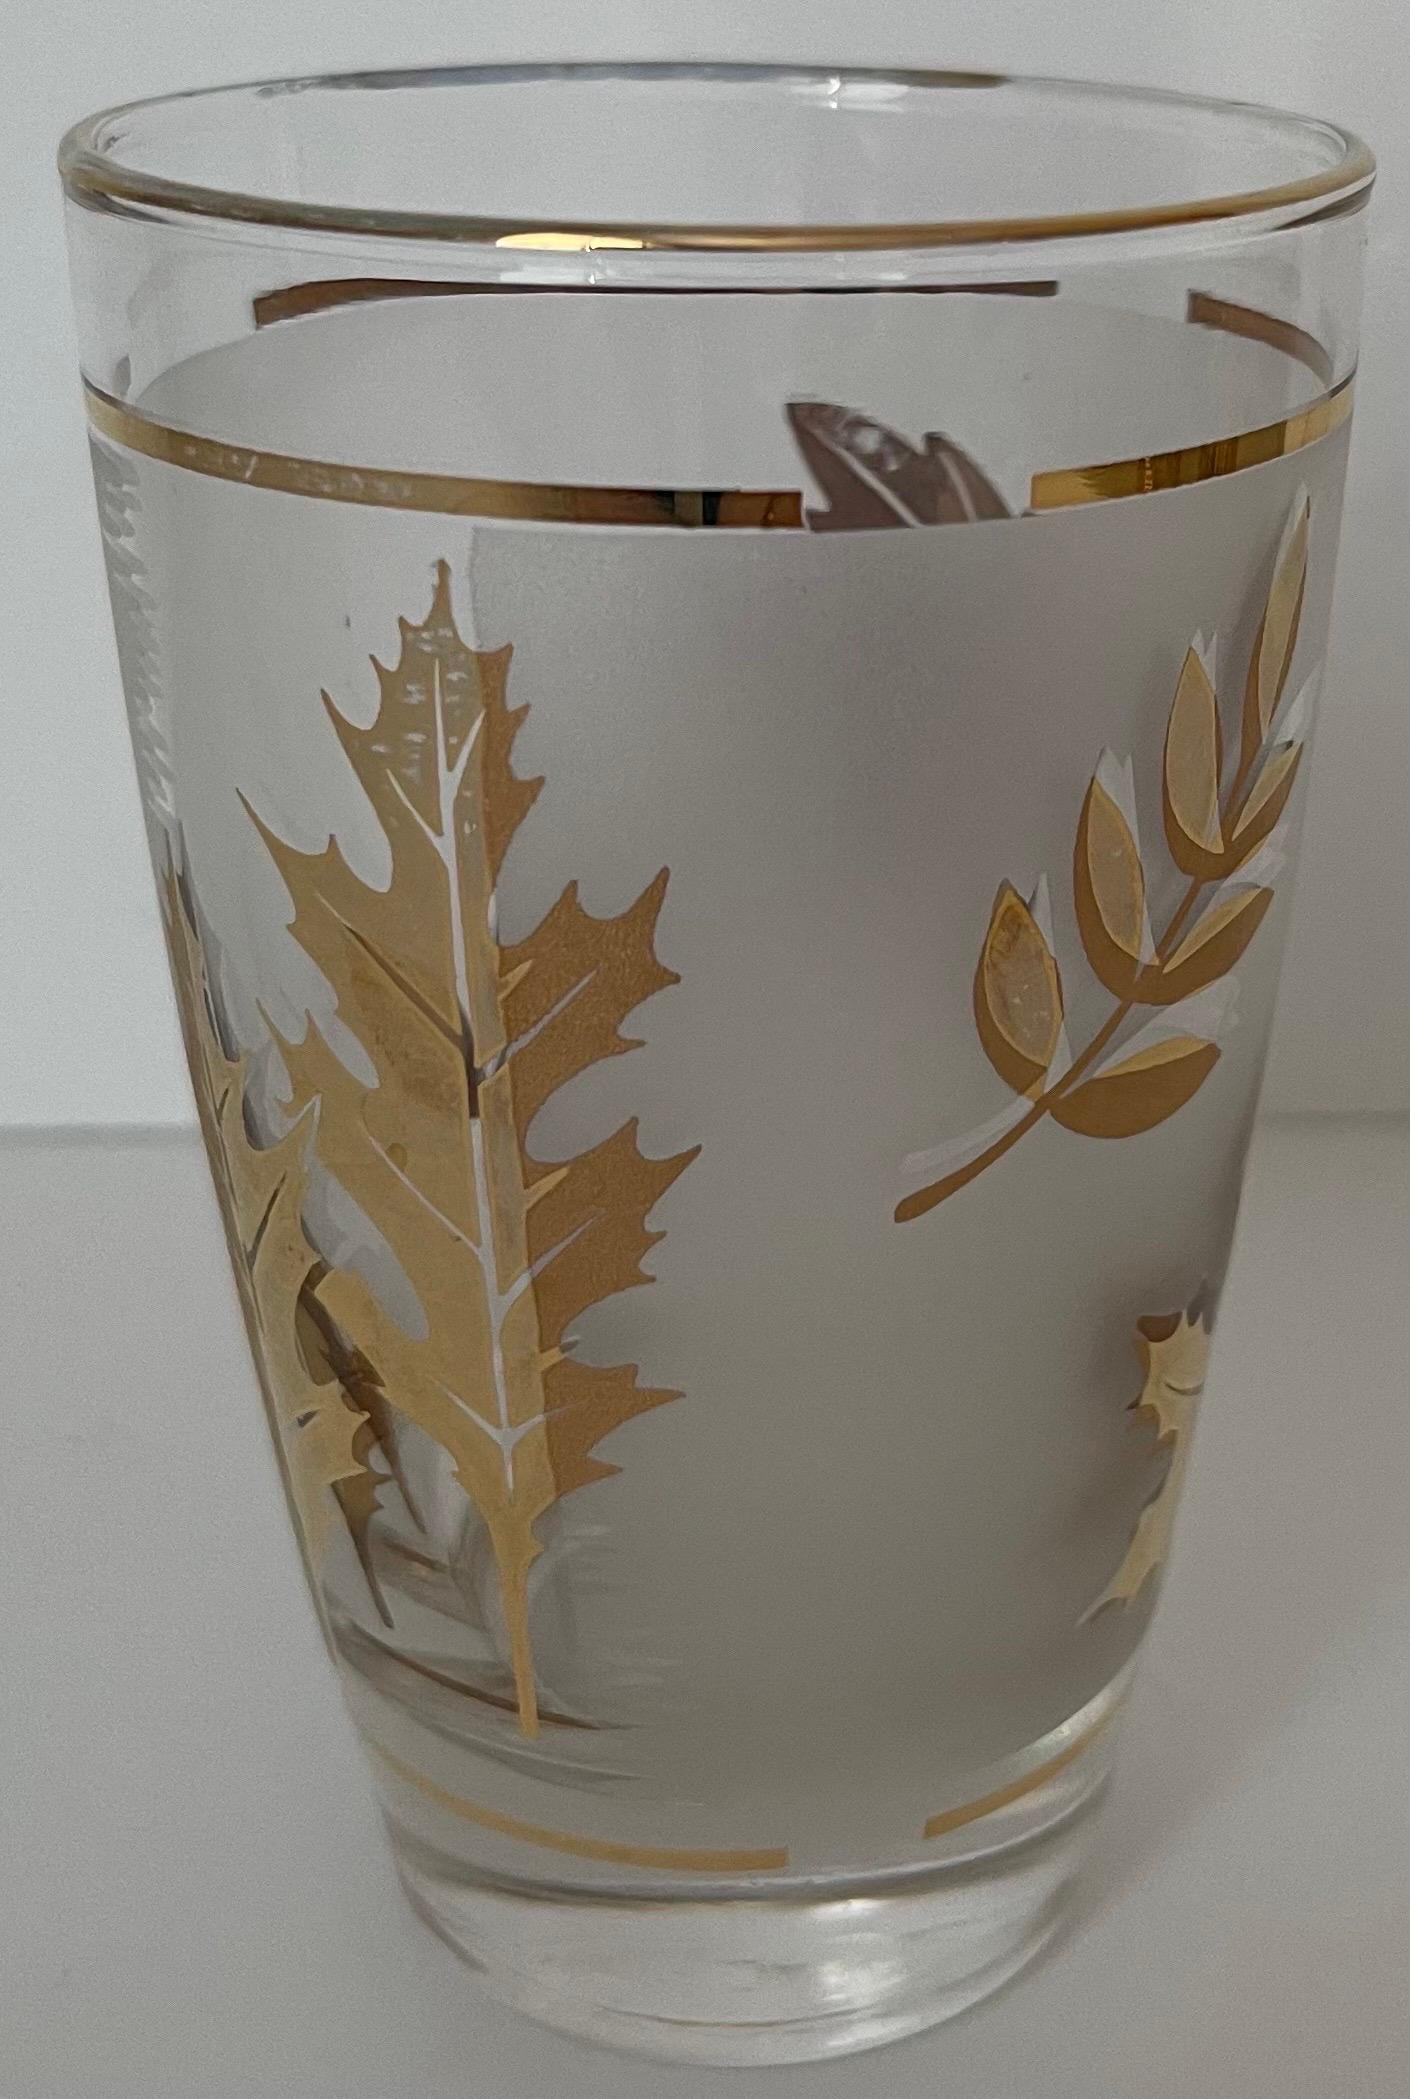 Golden Foliage Leaf Highball Glasses Set of 8 and Ice Bucket by Libby Glass 6